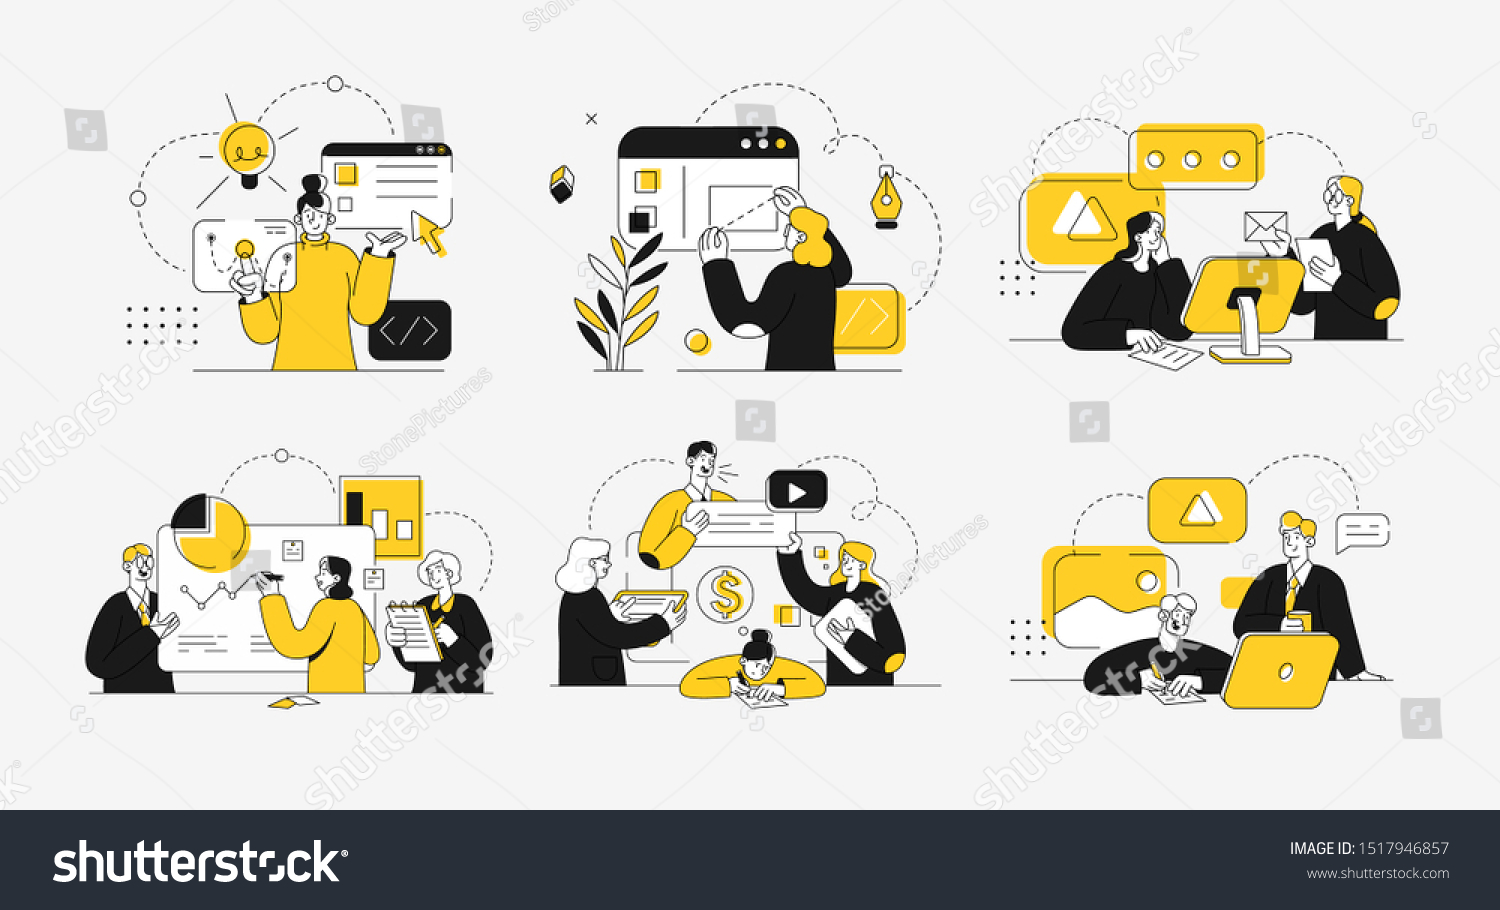 Business concept illustrations. Collection of scenes at office with men and women taking part in business activity. Outline vector illustration. #1517946857